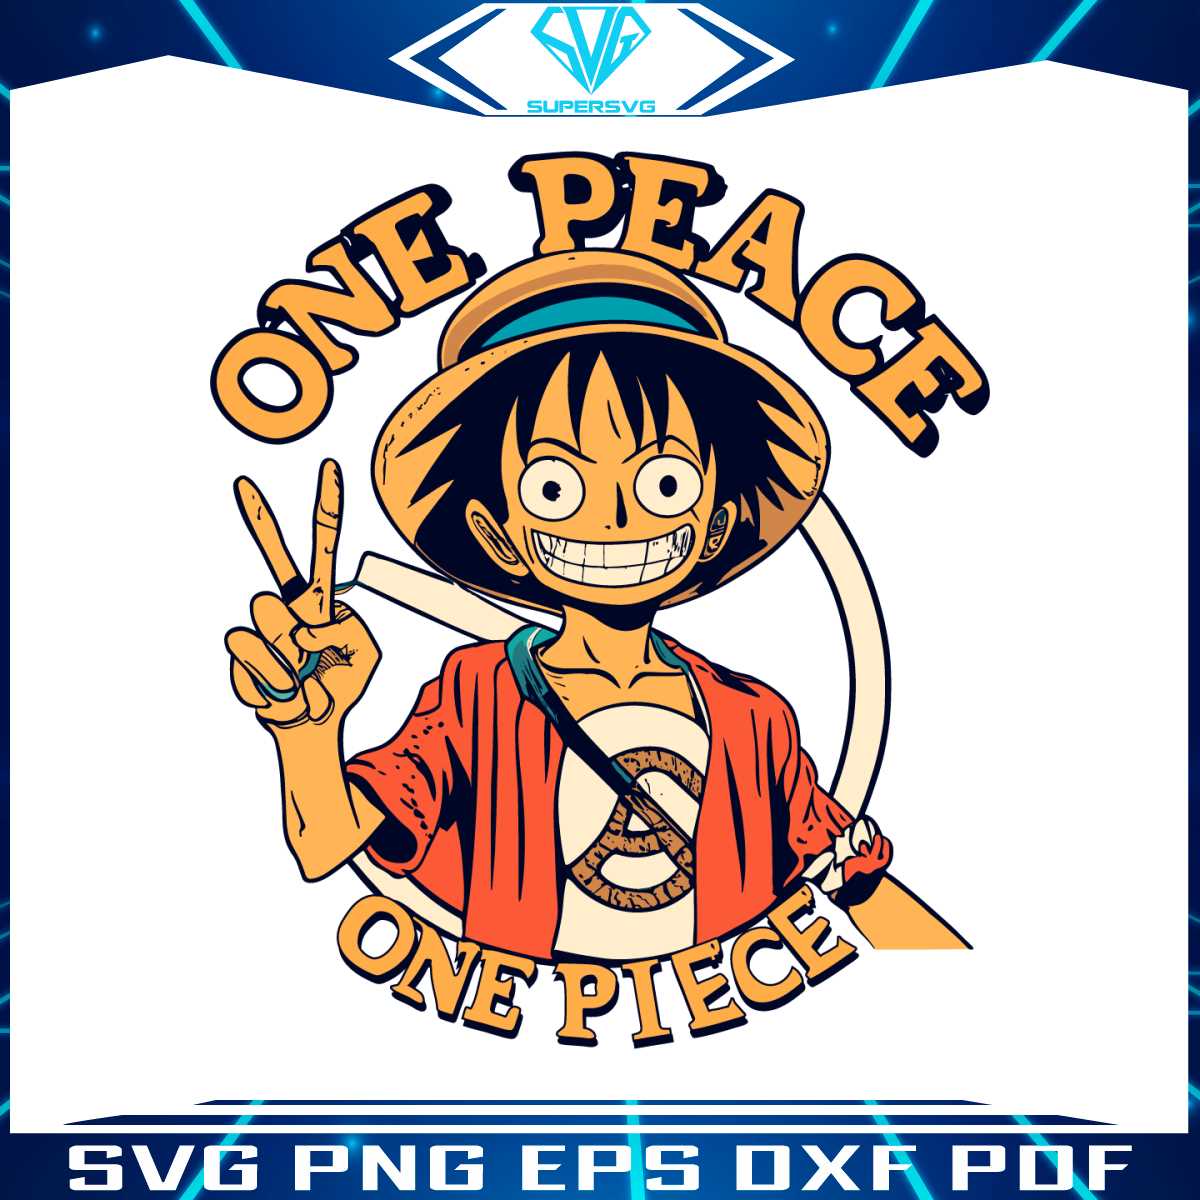 one-piece-monkey-d-luffy-one-peace-svg-graphic-design-file